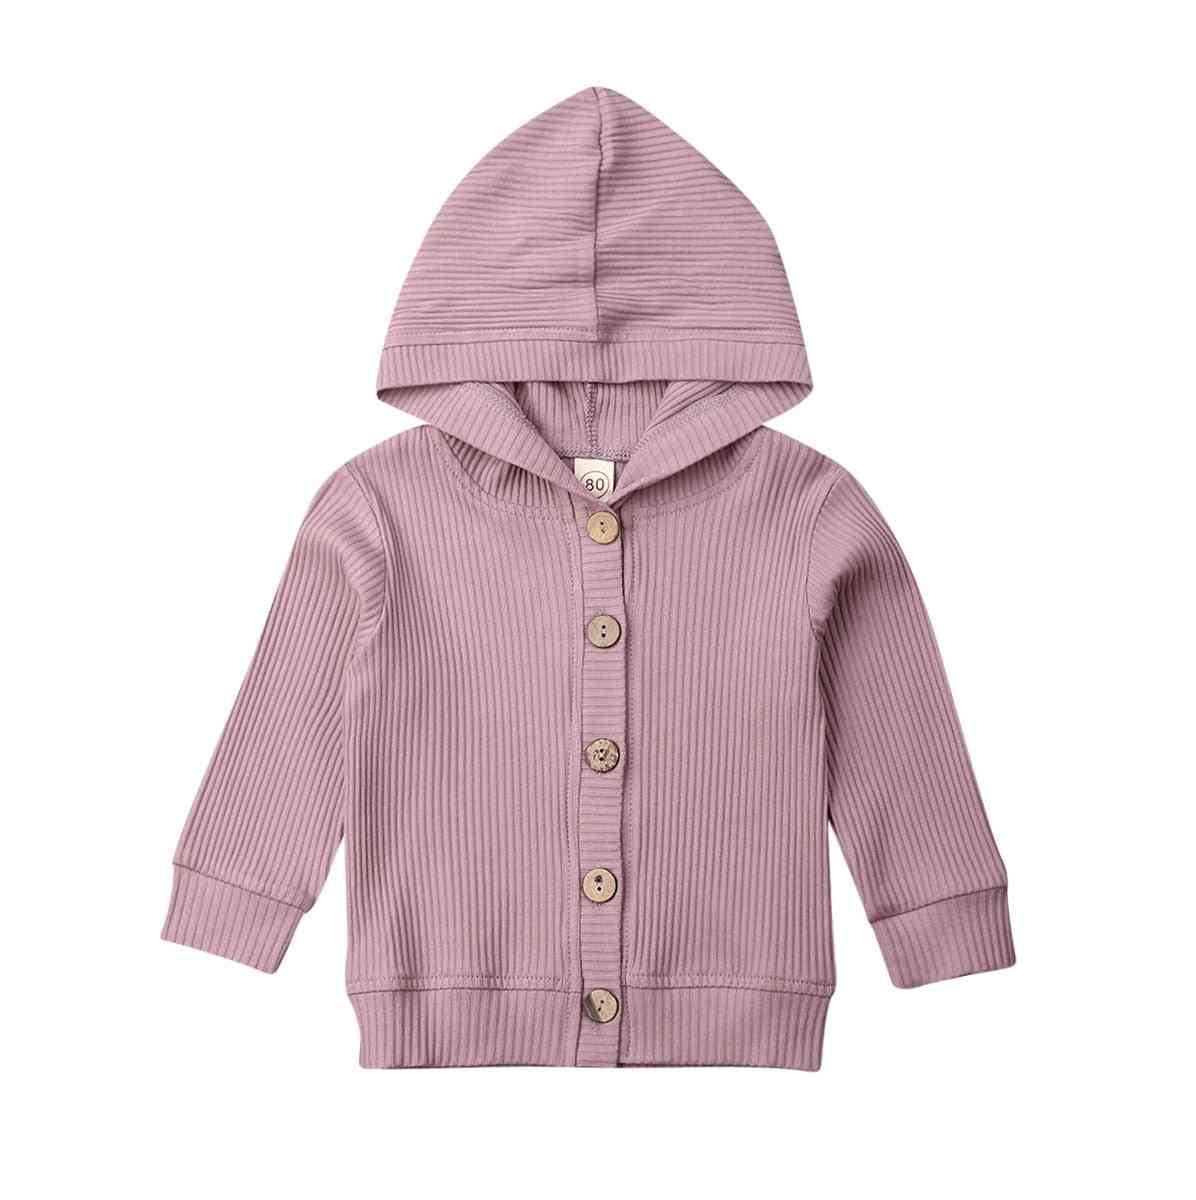 Autumn Infant Baby Girl Long Sleeve Knitted Coat / Jacket, Outwear Tops